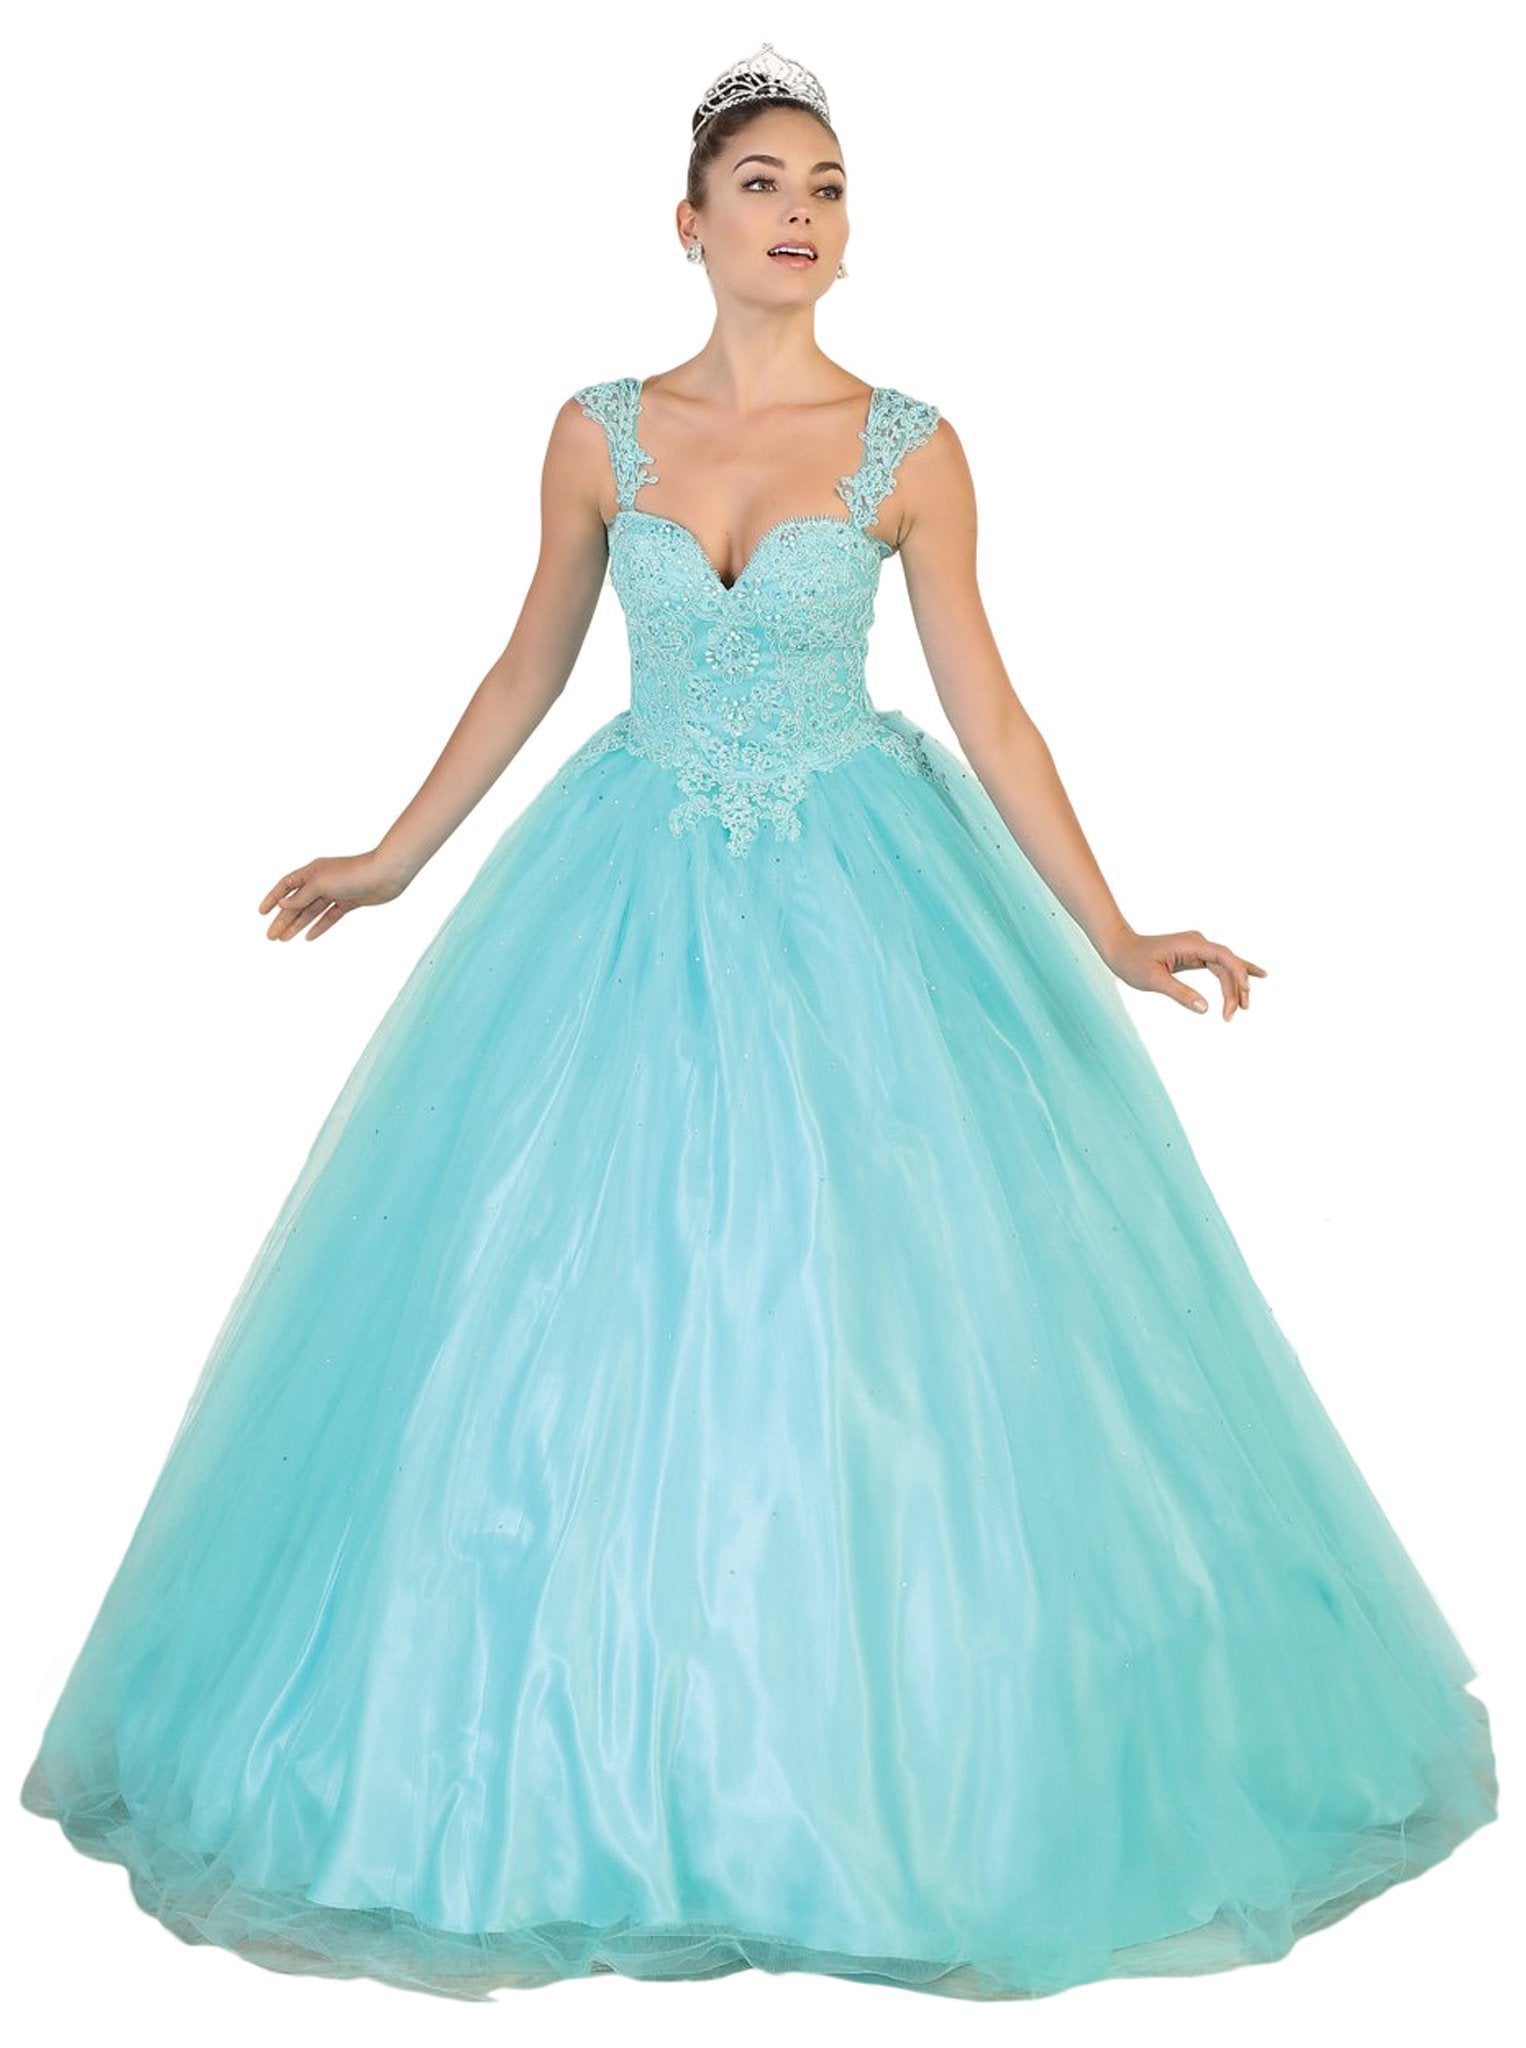 May Queen - Beaded Lace Plunging Sweetheart Quinceanera Ballgown